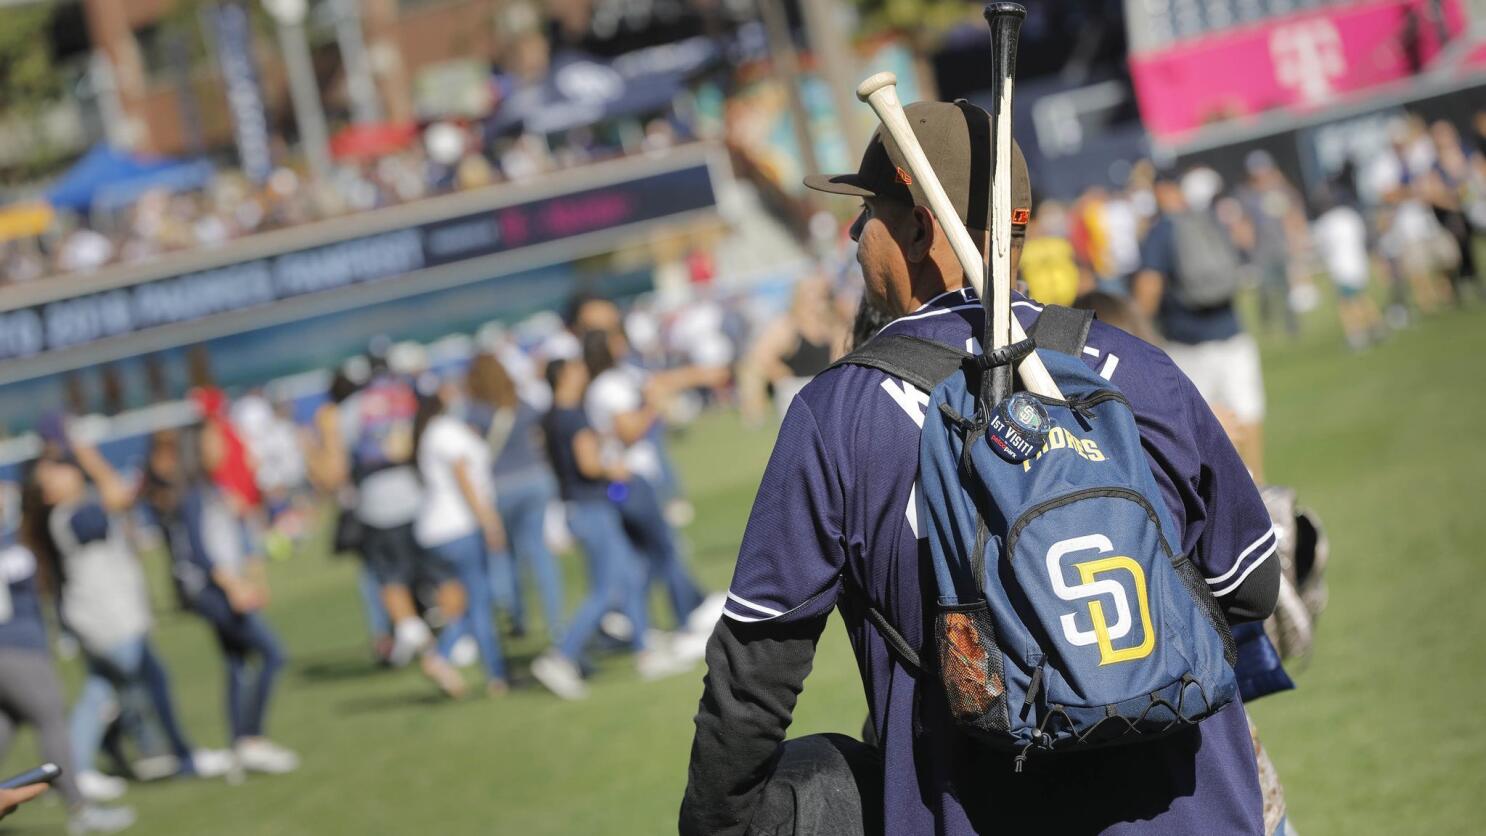 The San Diego Padres are celebrating their 50th anniversary 